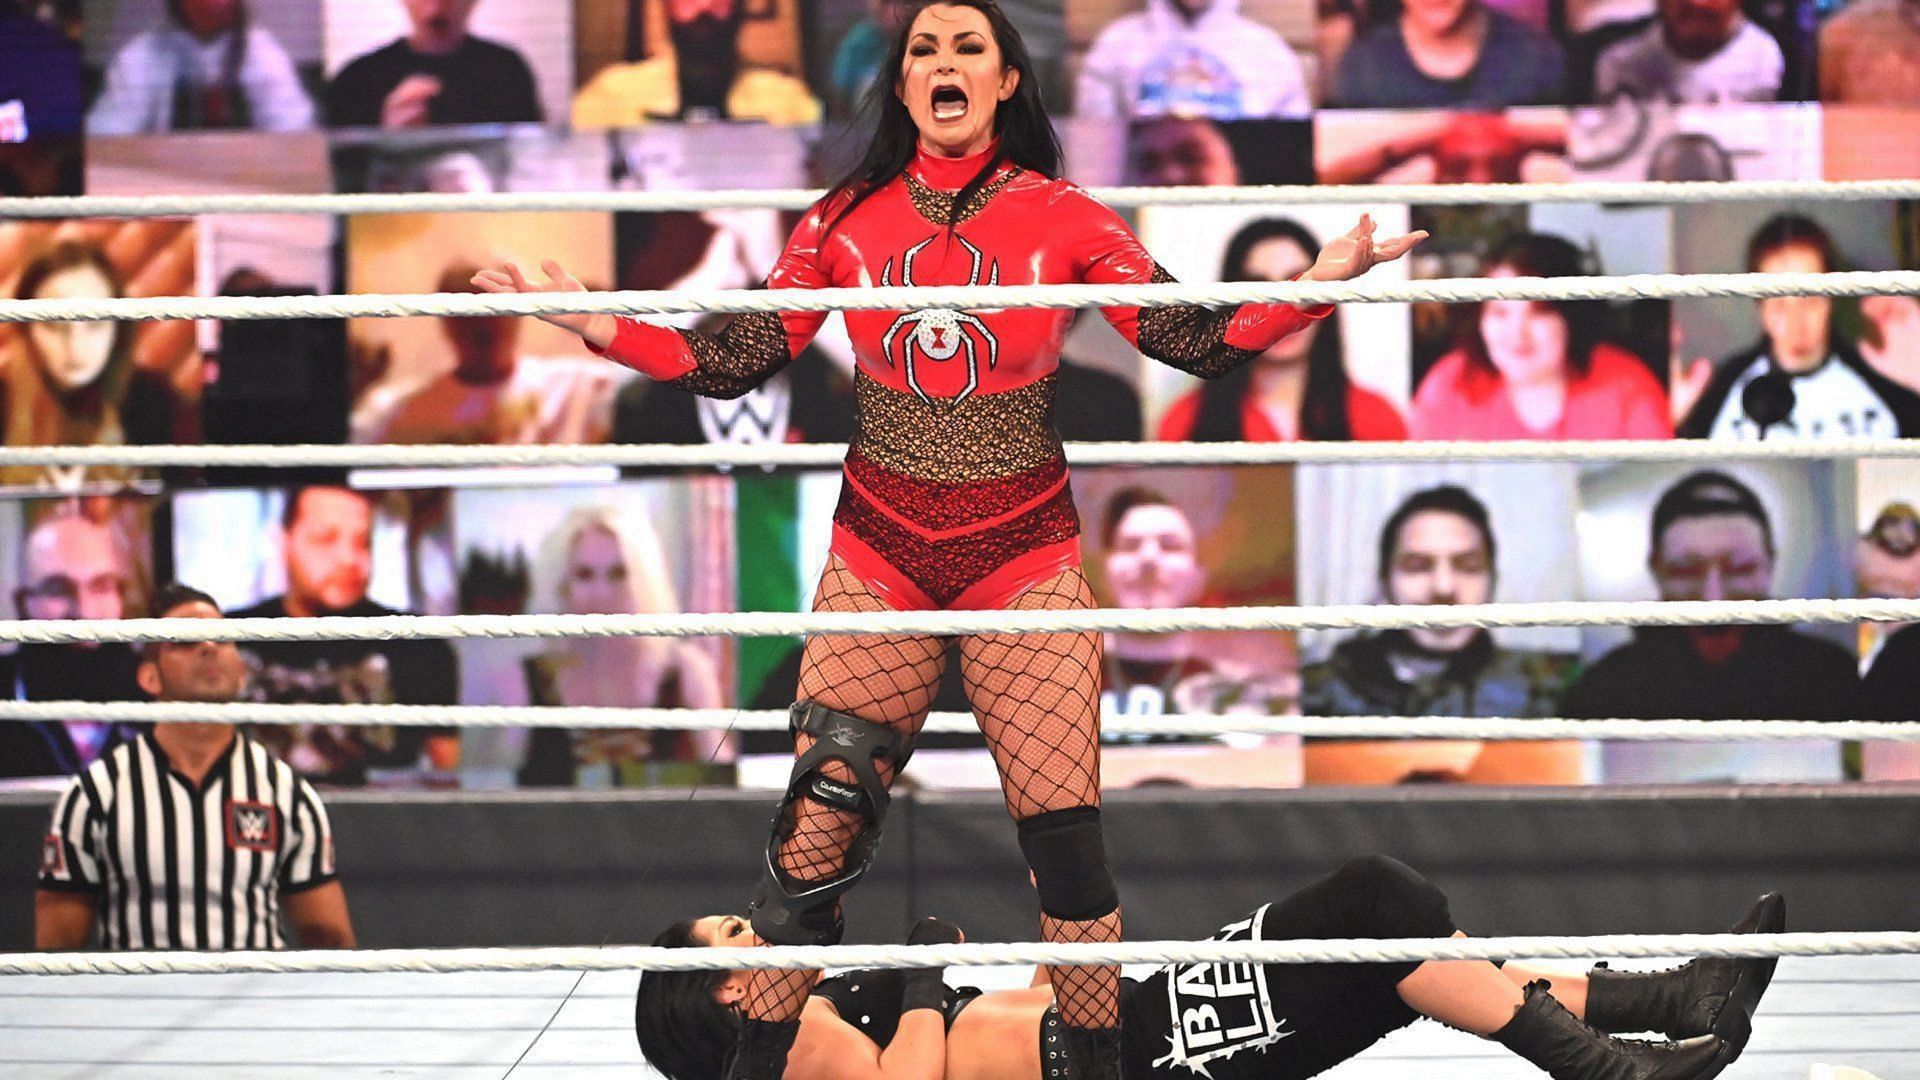 Victoria competed in the 2021 Women&#039;s Royal Rumble